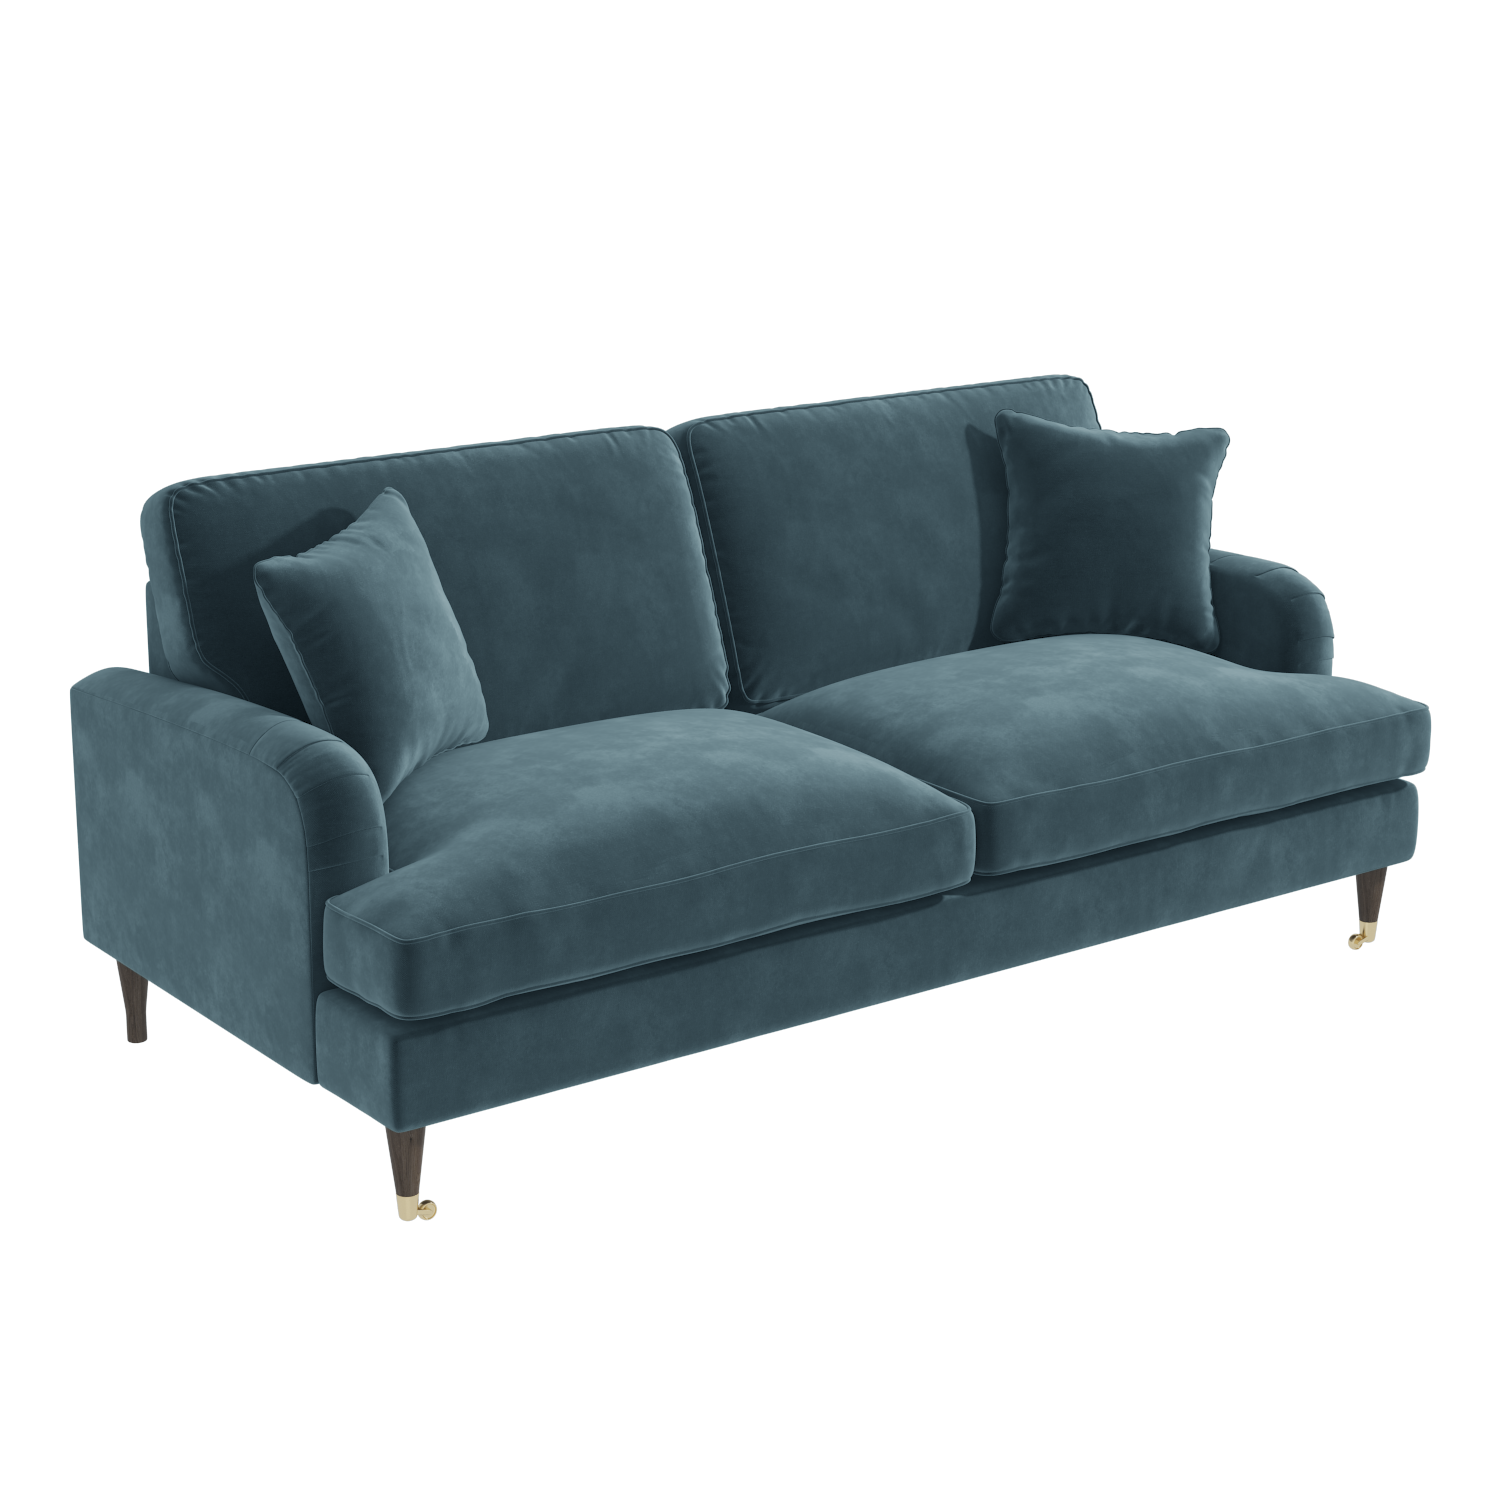 Read more about Petrol blue velvet 3 seater sofa and footstool set payton